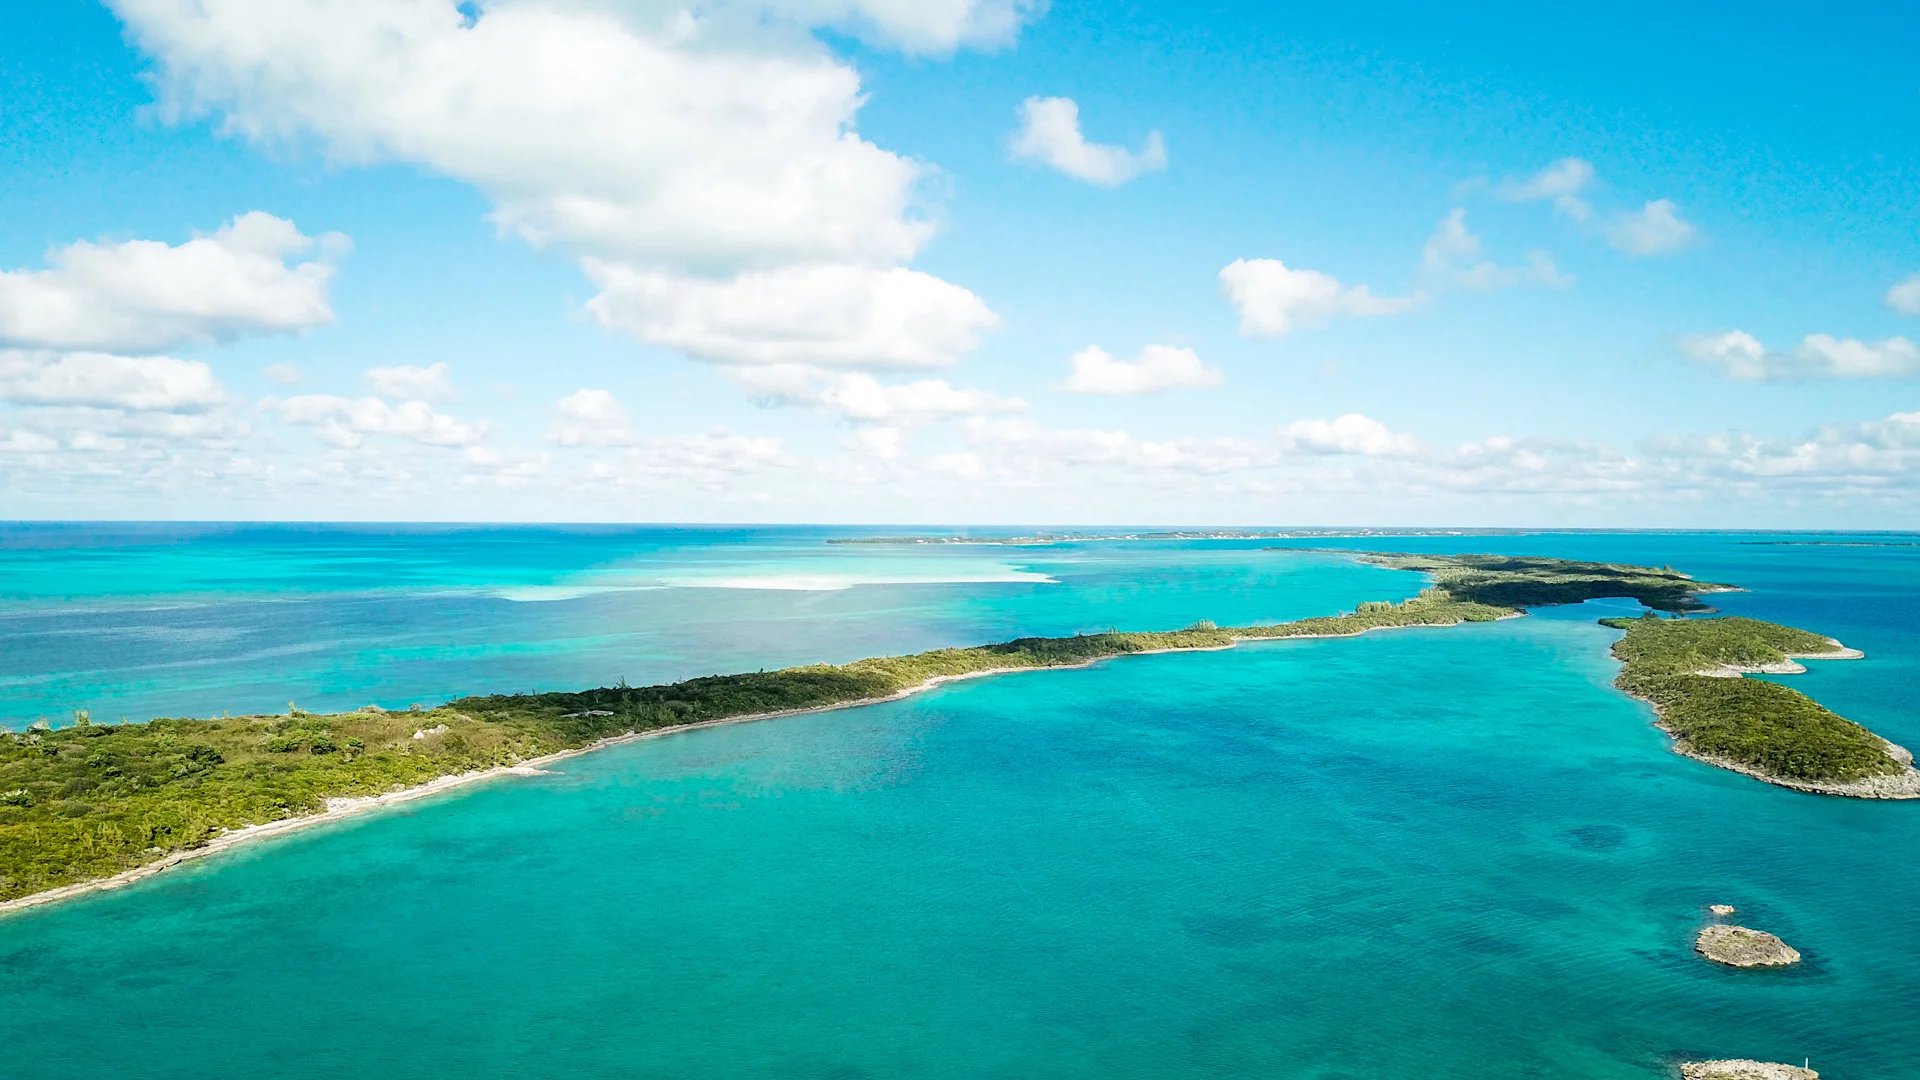 royal island, the perfect private island opportunity - mls 51444 image38